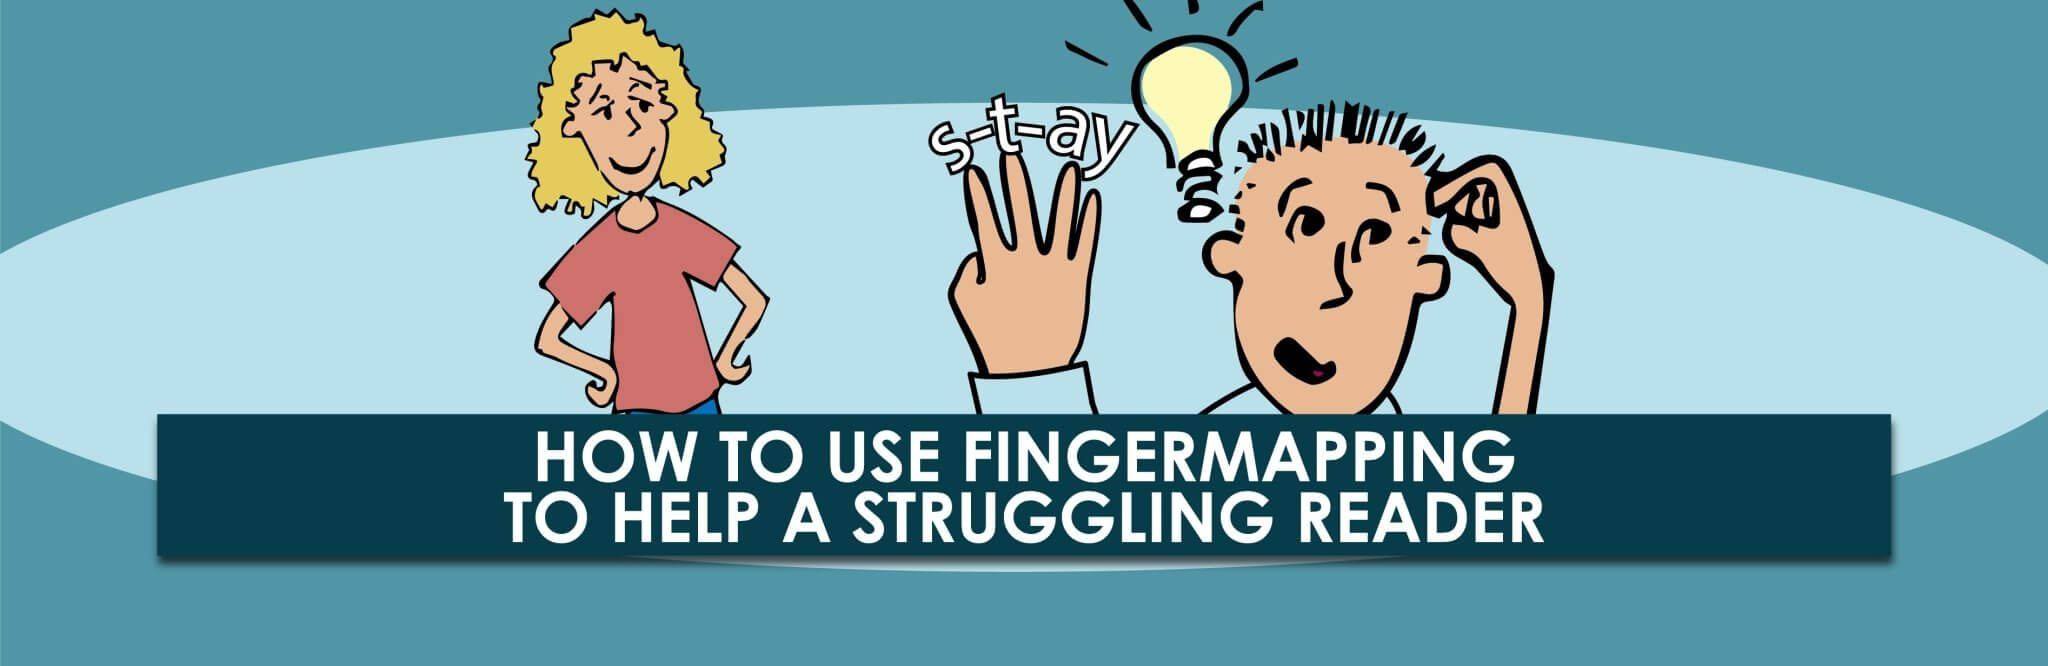 How to Use Fingermapping to Help a Struggling Reader